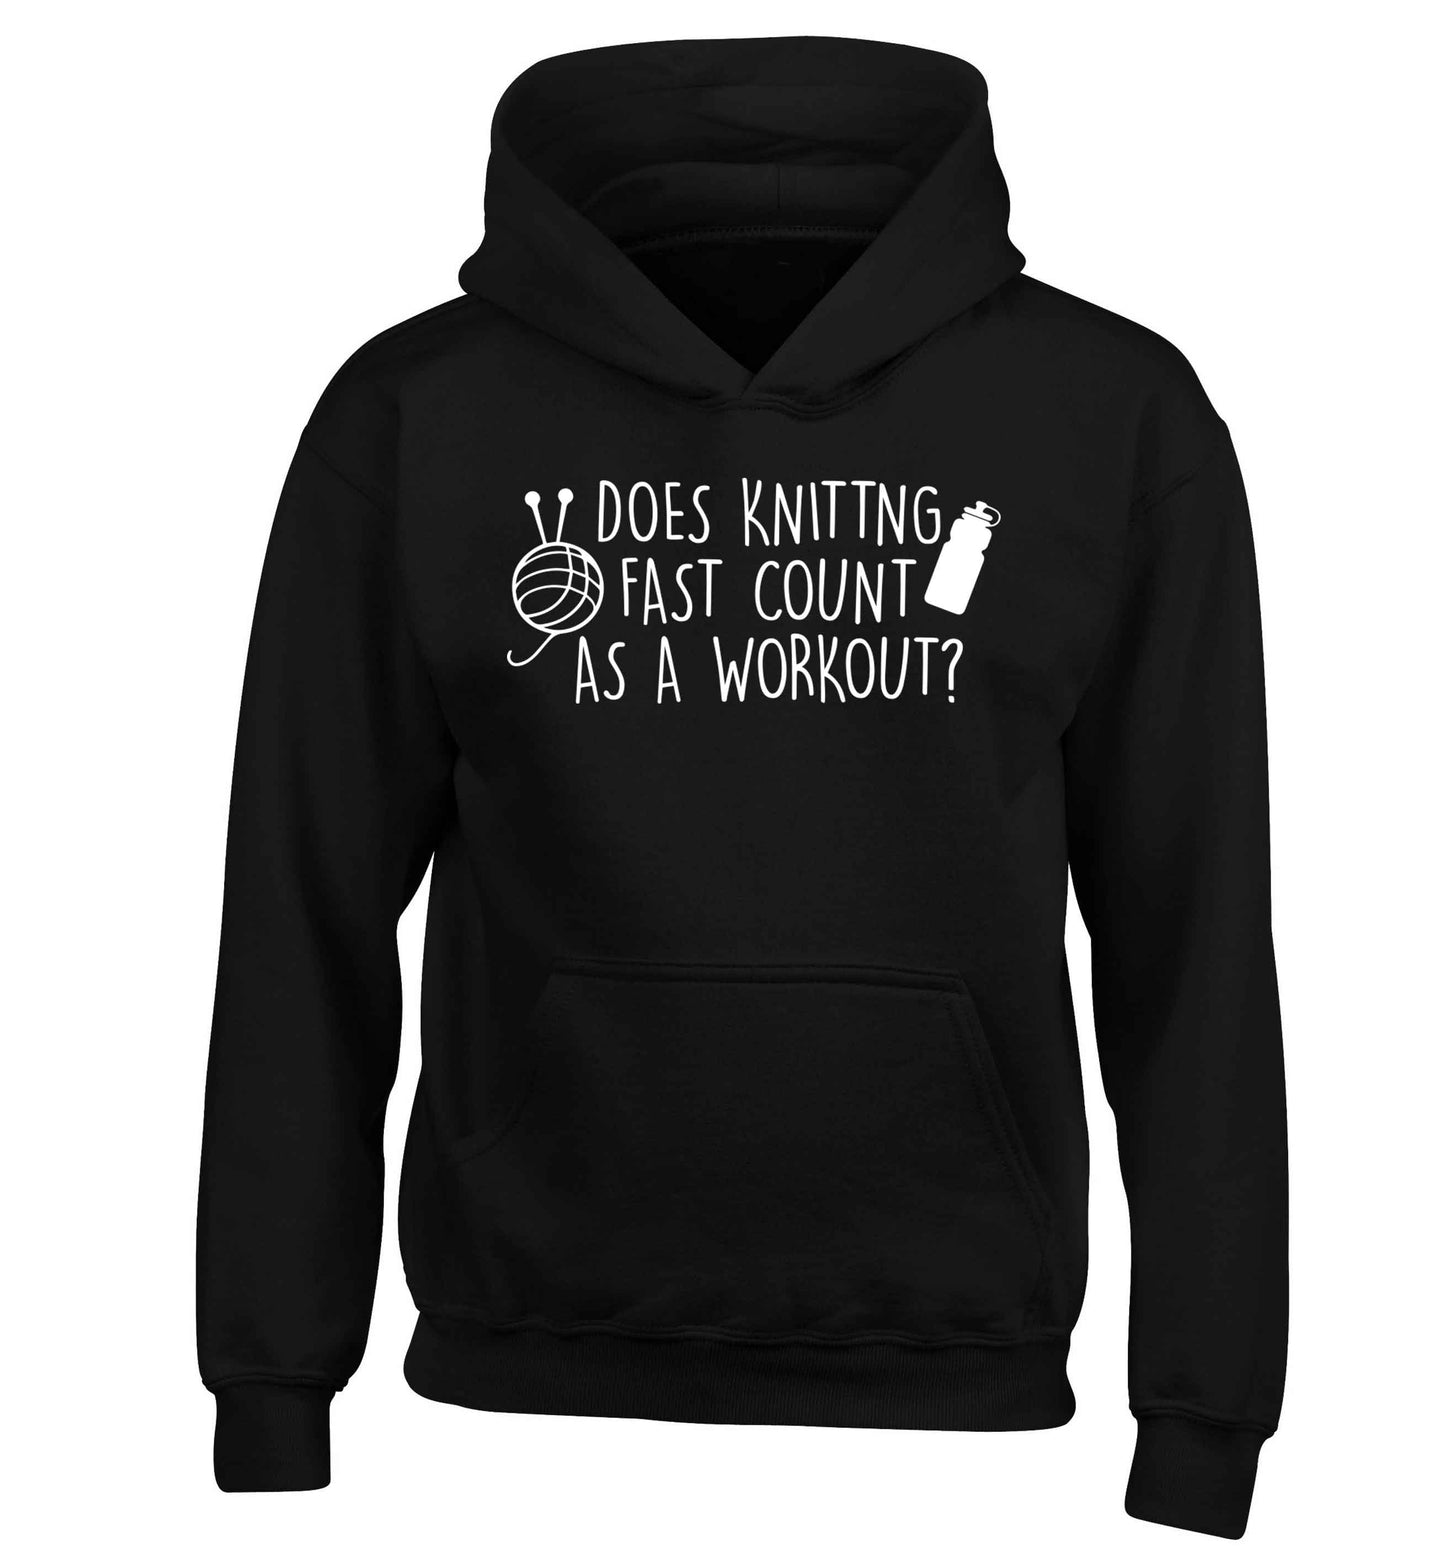 Does knitting fast count as a workout? children's black hoodie 12-13 Years